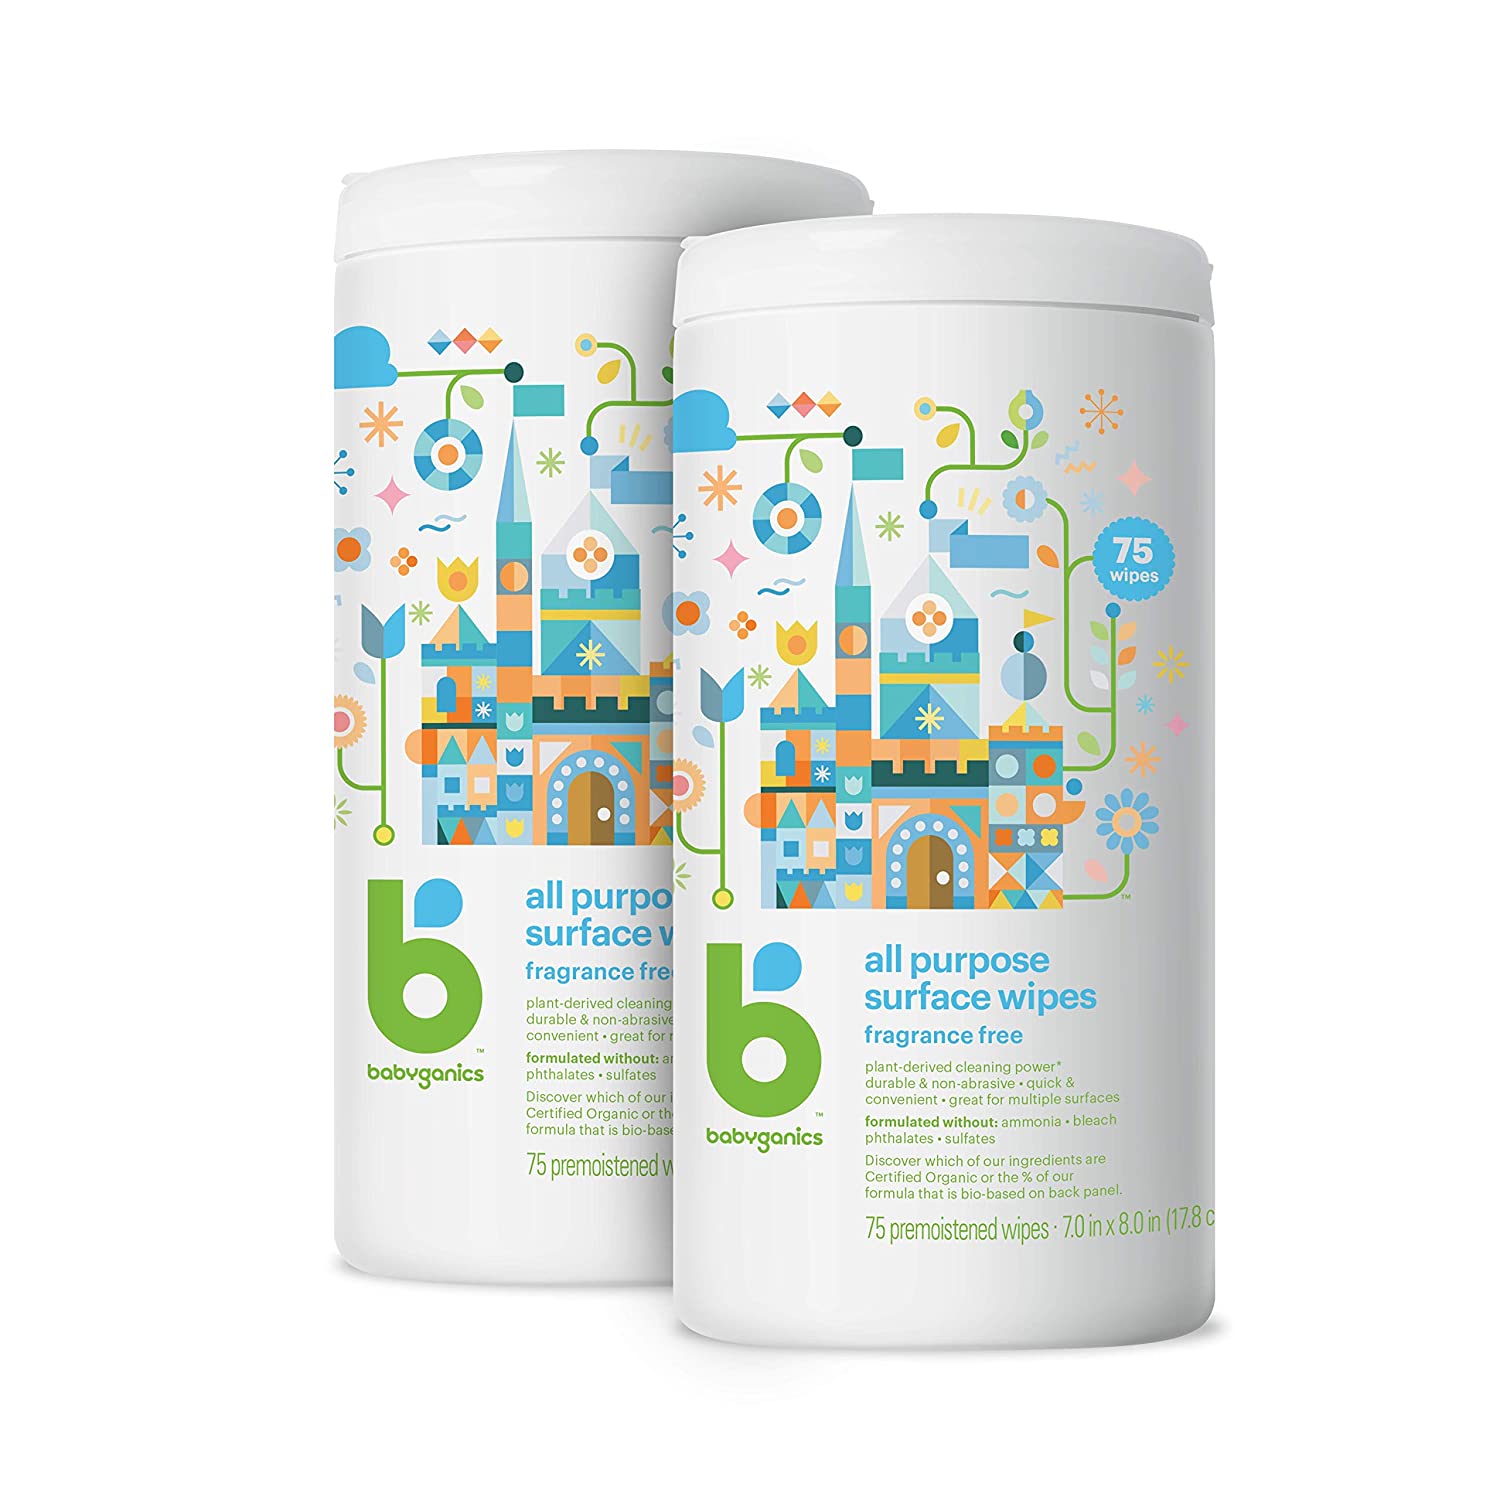 Amazon: 2 Pack 75 ct. Babyganics All Purpose Surface Wipes, Fragrance Free, 150 Count, Plant Based and Non-Abrasive, No Ammonia, No Bleach $10.63 w/ S&S + FS w/ Prime